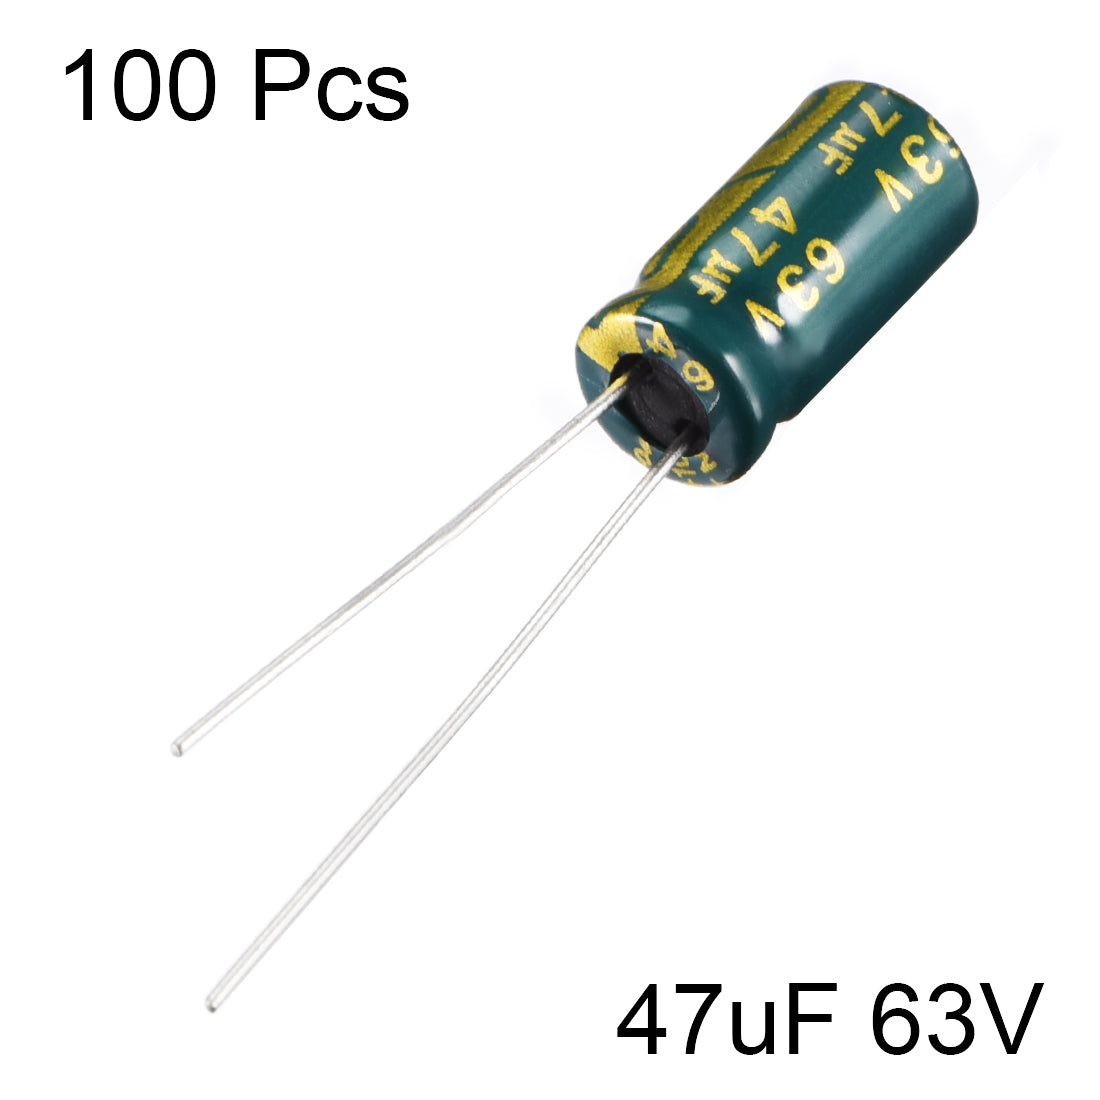 uxcell Uxcell Aluminum Radial Electrolytic Capacitor Low ESR Green with 47uF 63V 105 Celsius Life 3000H 6.3 x 12 mm High Ripple Current,Low Impedance 100pcs